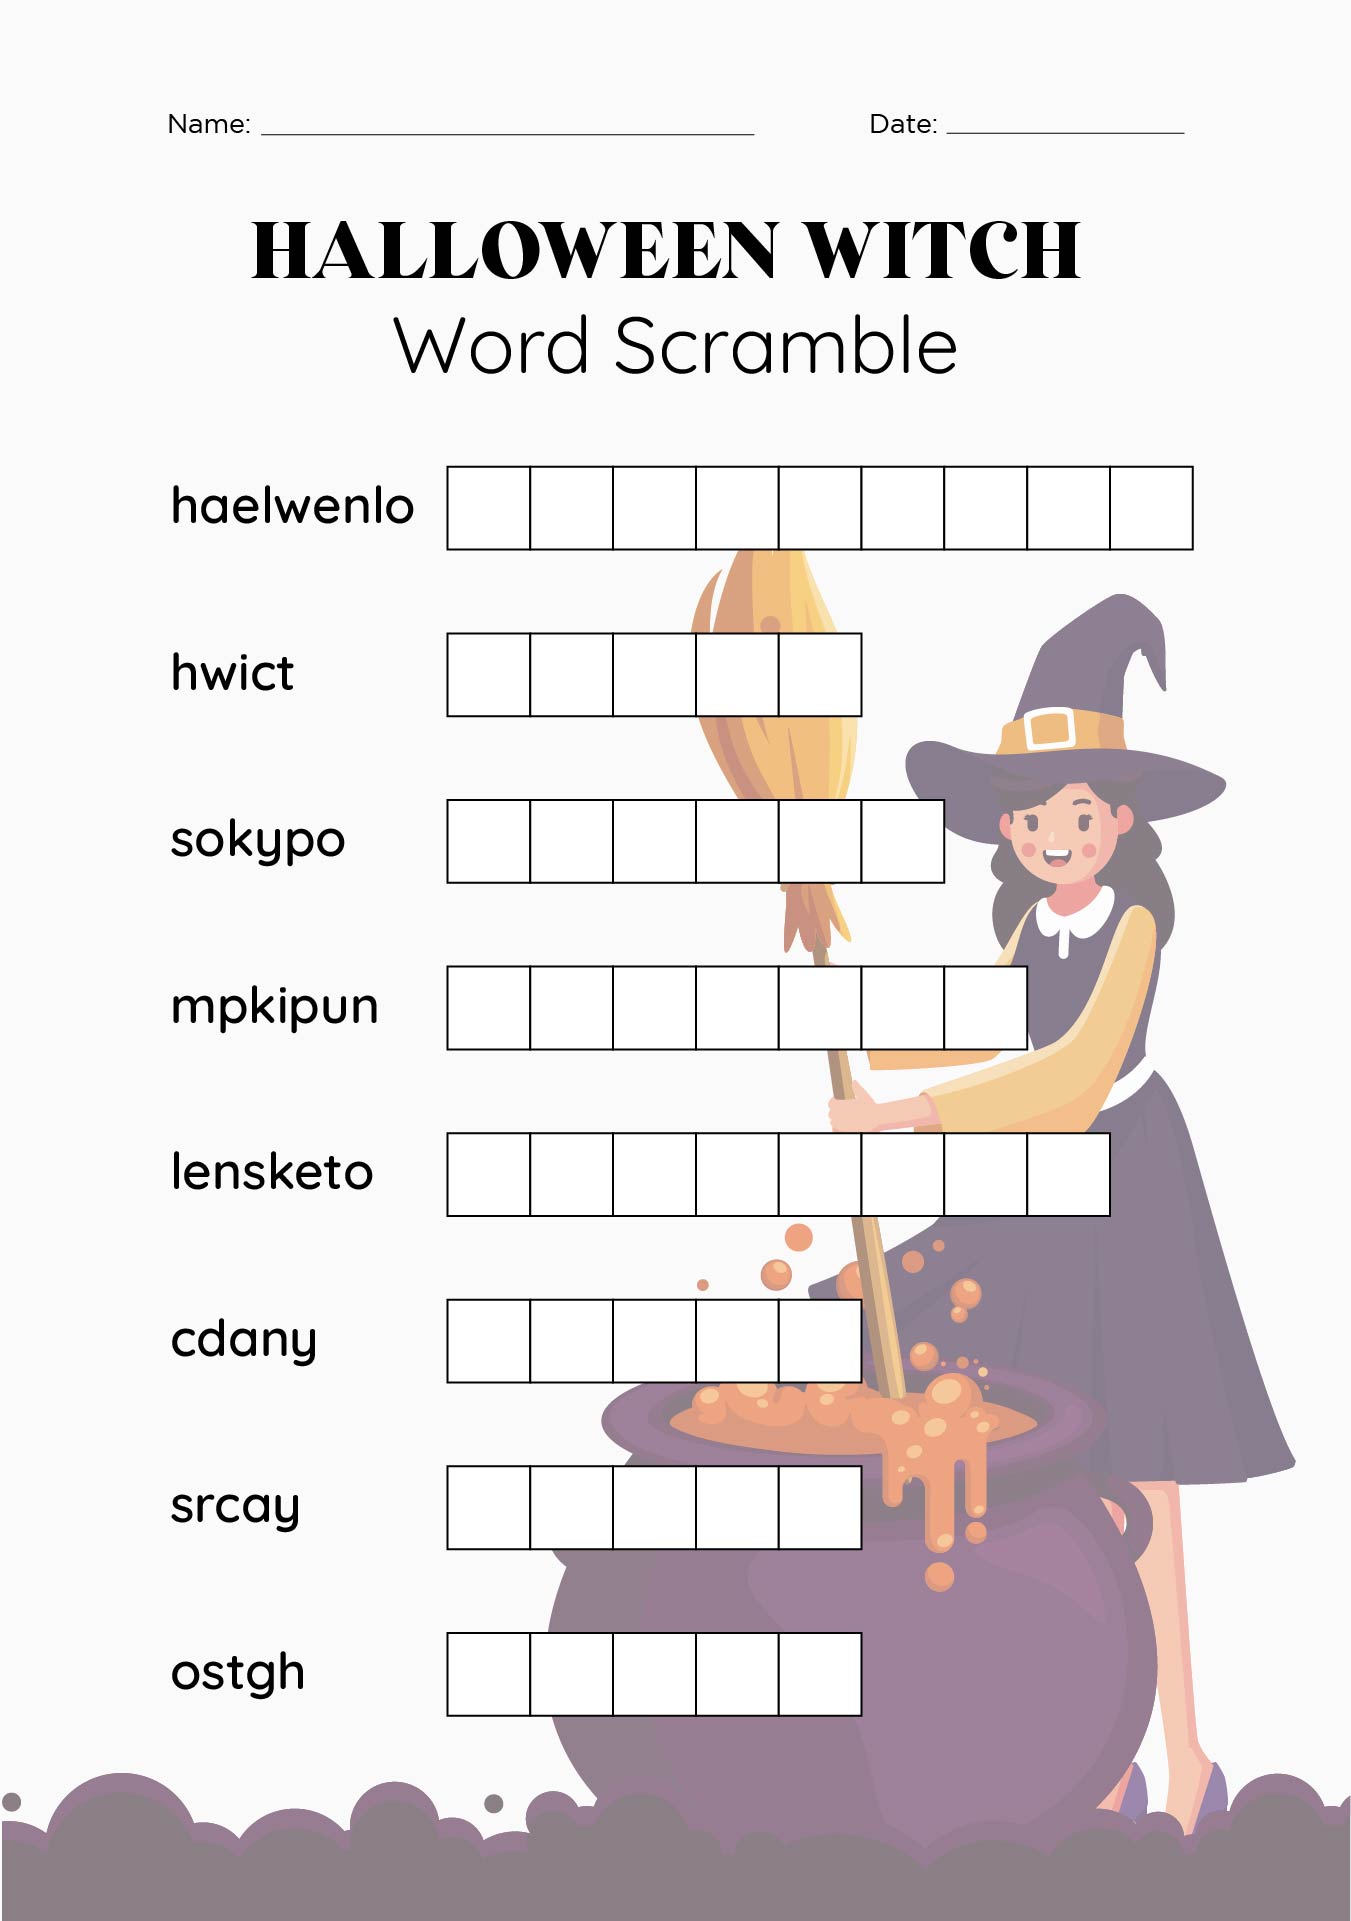 Printable Halloween Witch Word Scramble For Kids